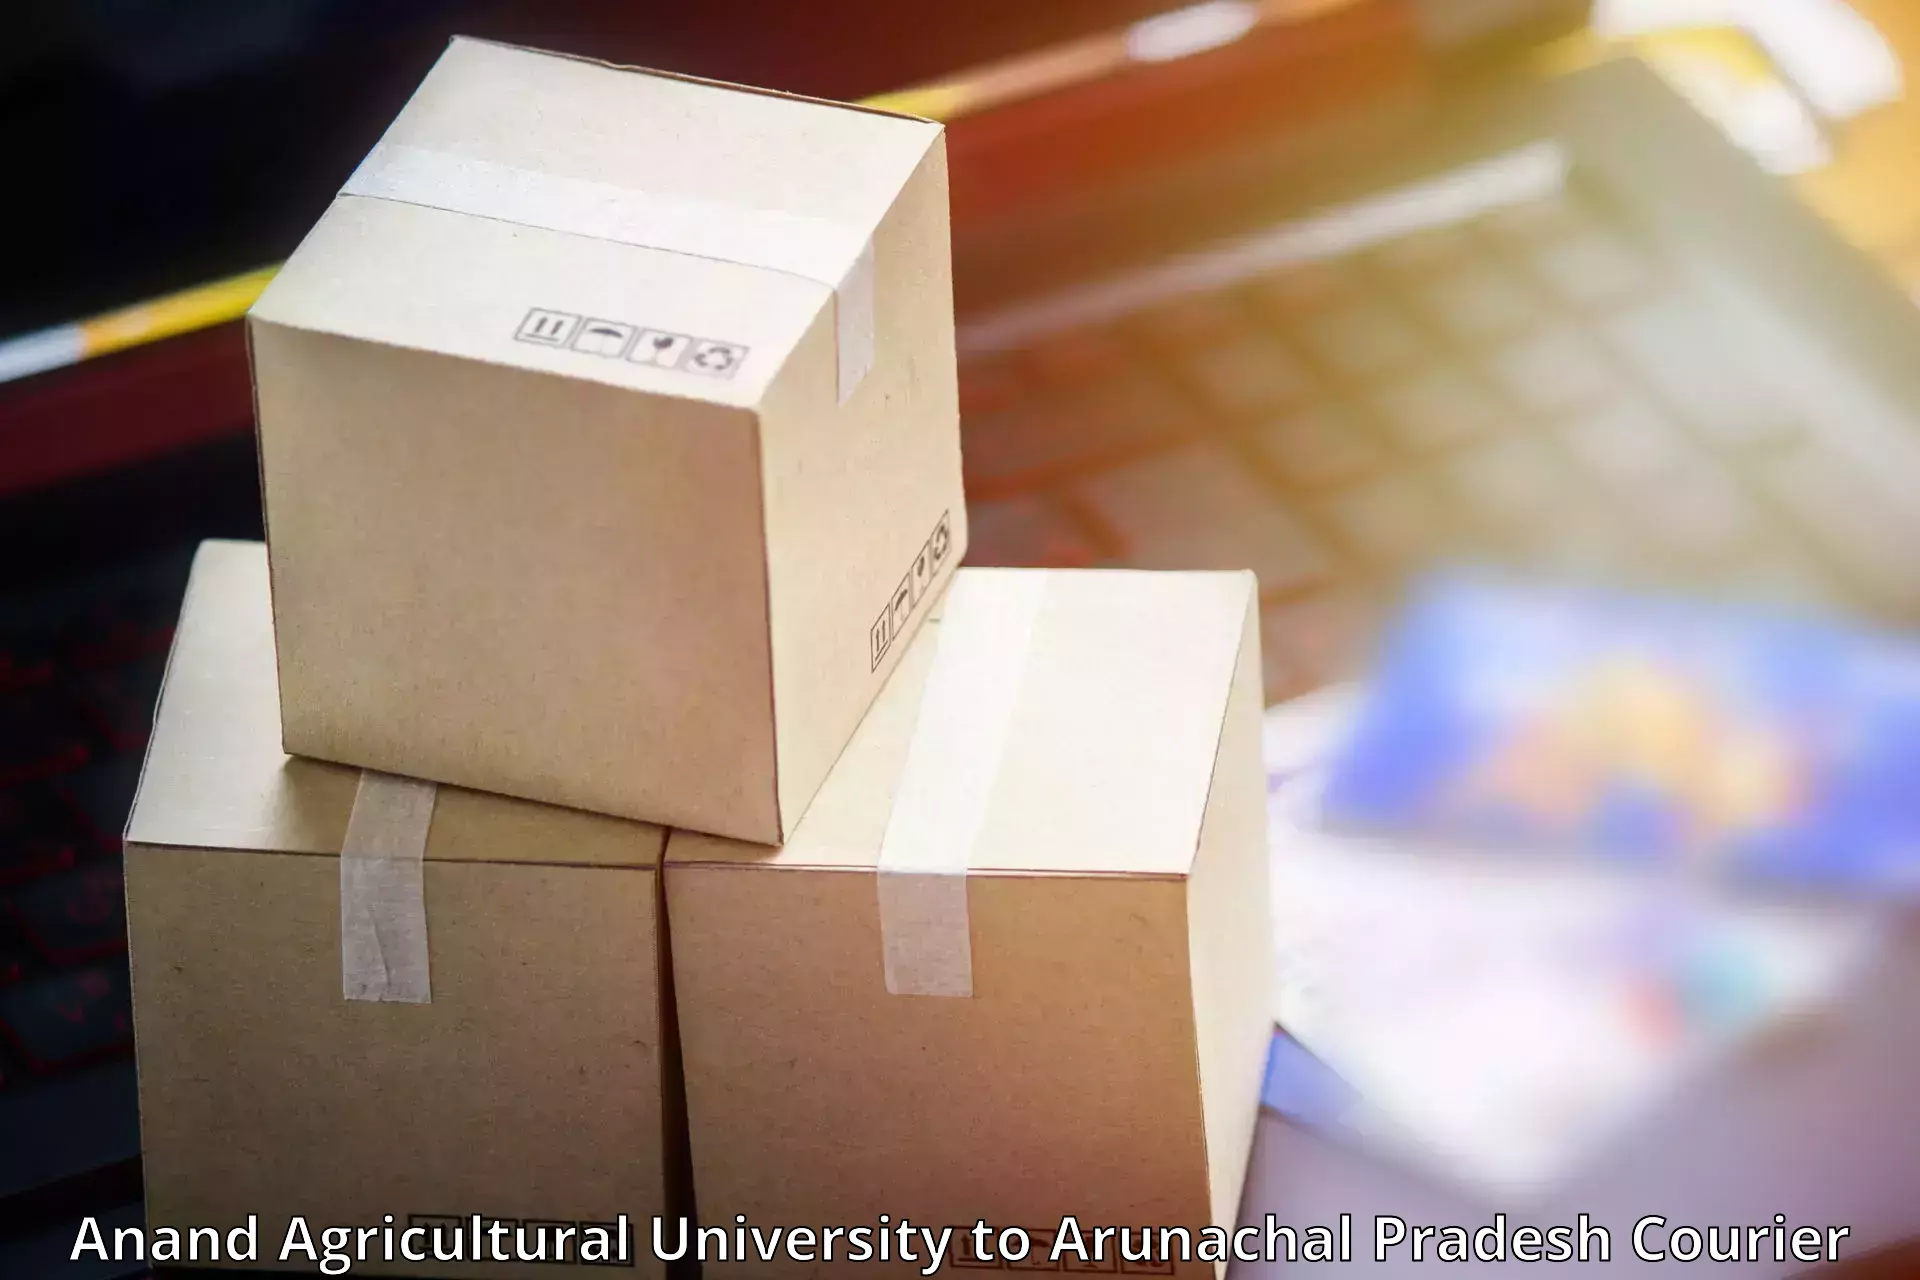 High-speed parcel service Anand Agricultural University to East Siang